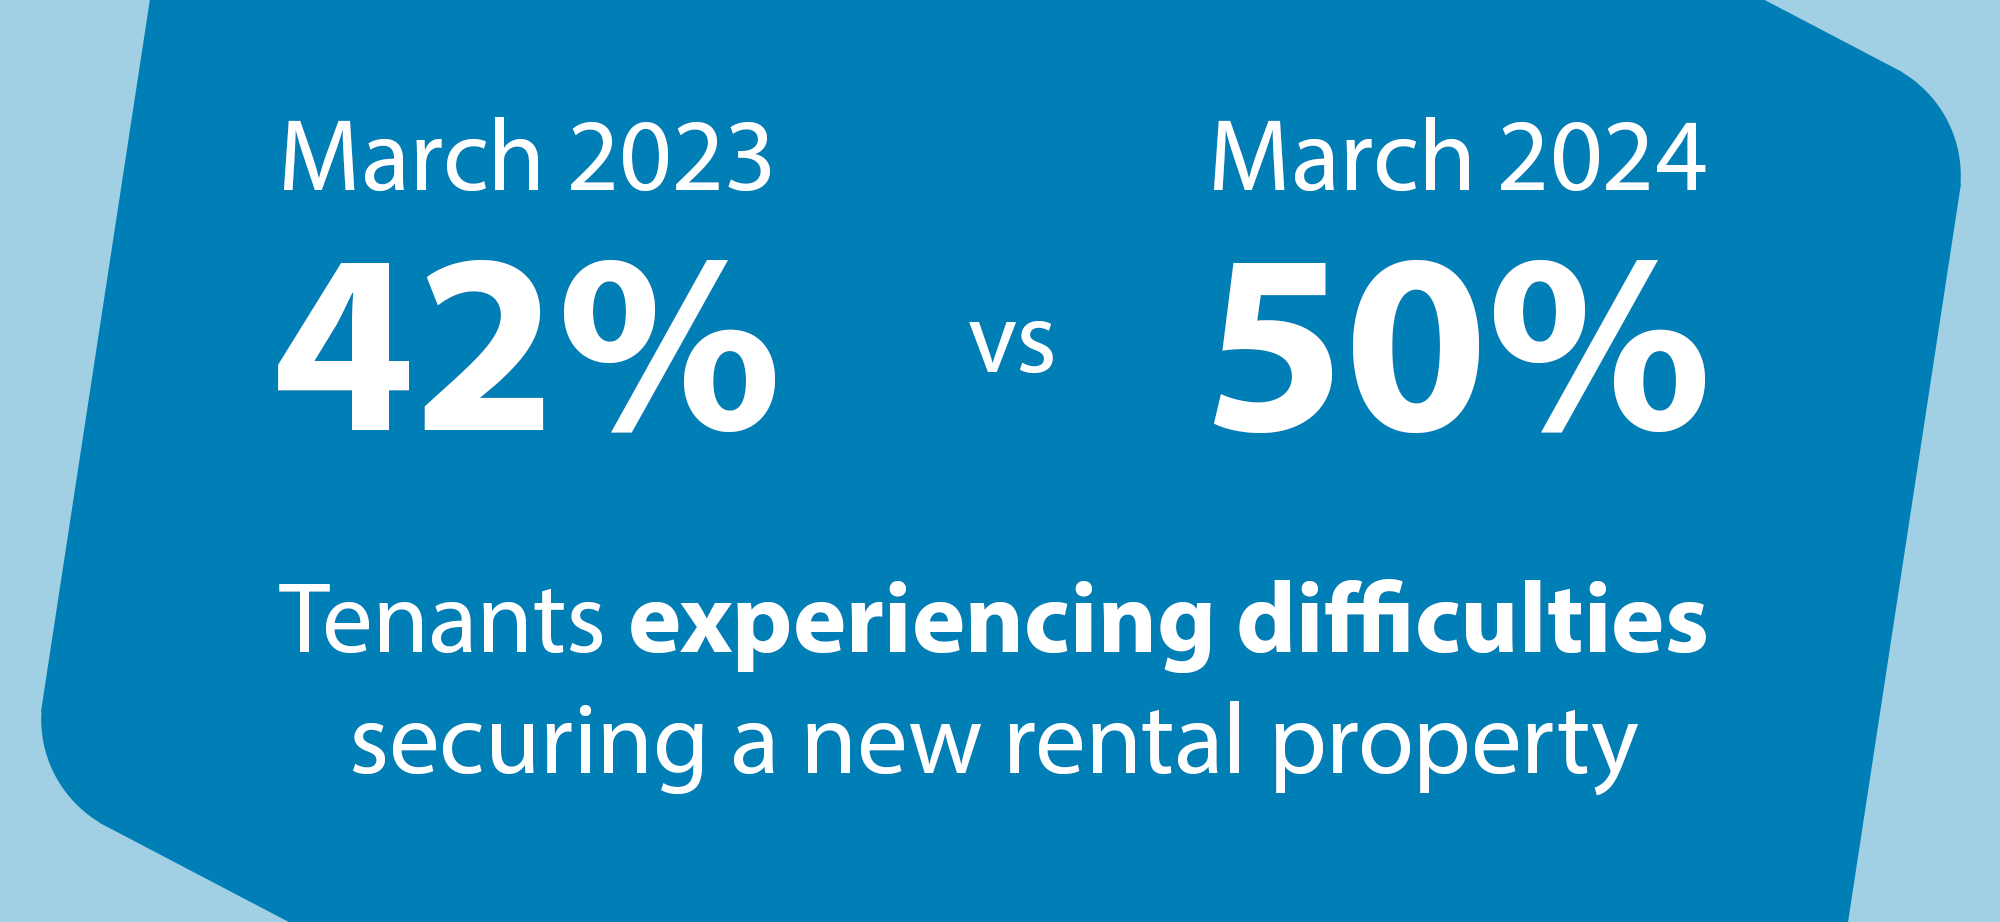 Tenants experiencing difficulties securing a new rental property. Up 8% since last year.